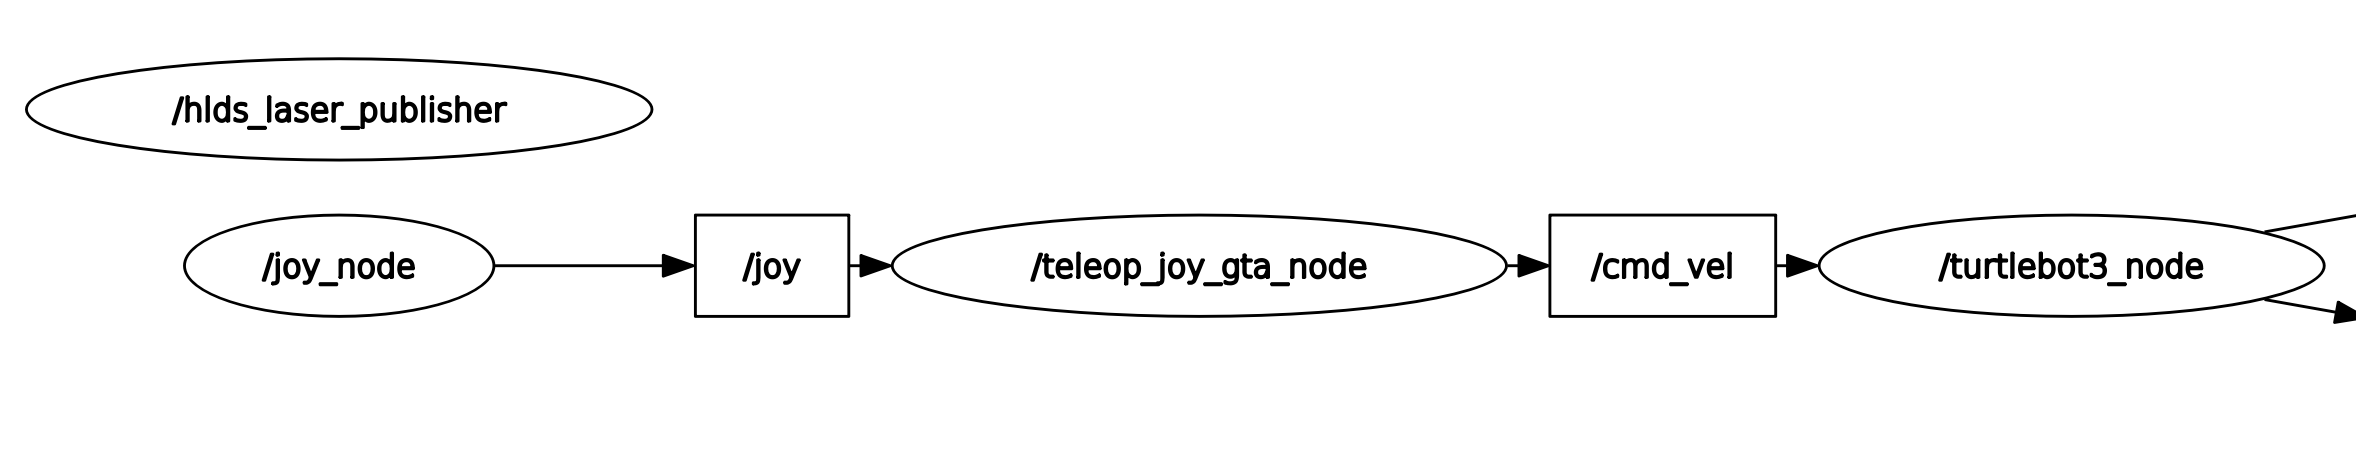 image of rqt_graph with gta node running